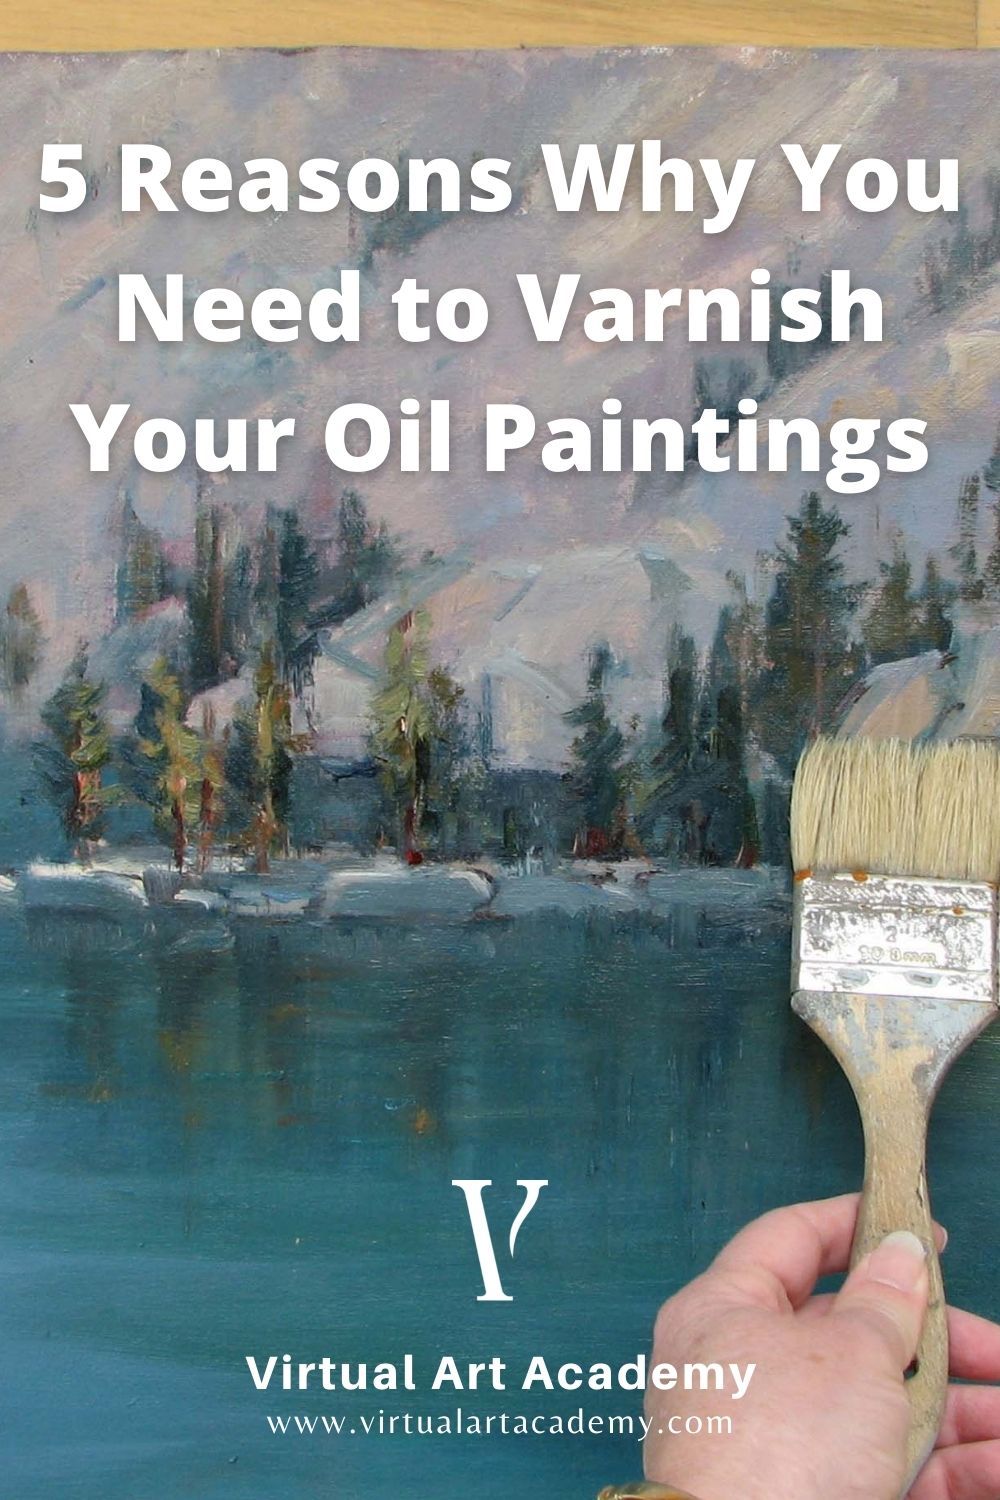 5 Reasons Why You Need to Varnish Your Oil Paintings